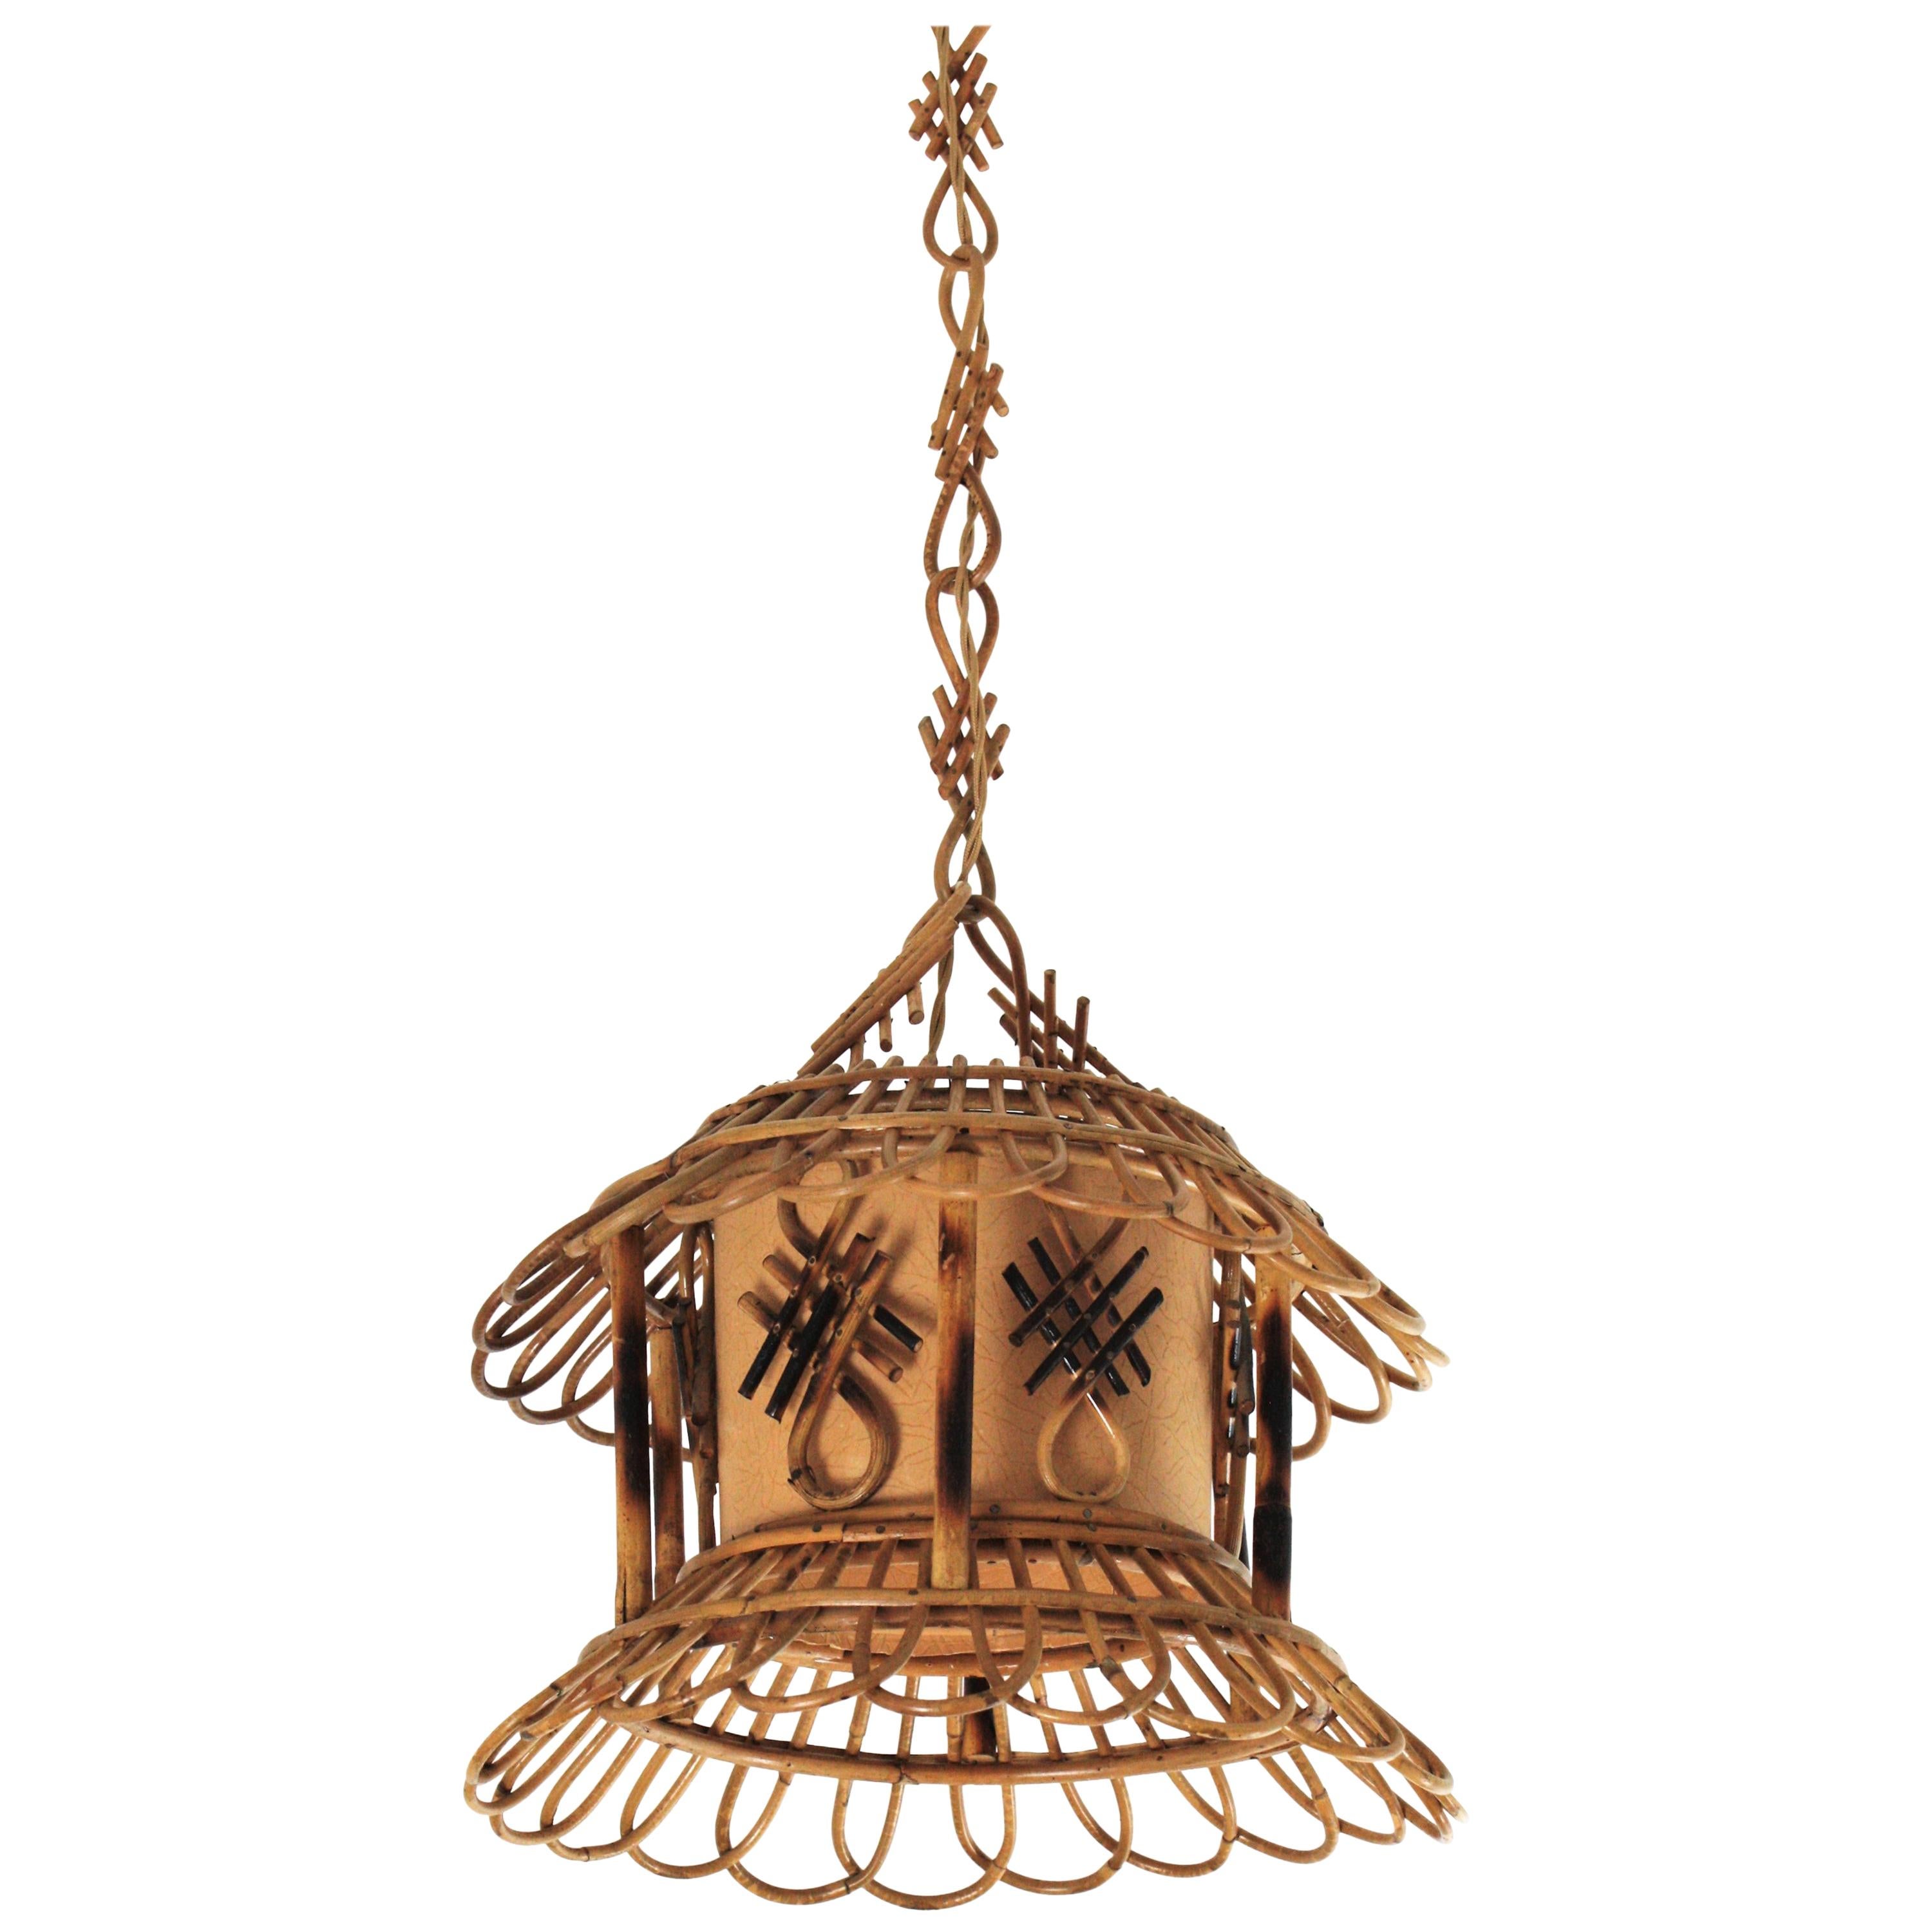 French Modernist Rattan Pagoda Pendant / Hanging Light with Chinoiserie Accents